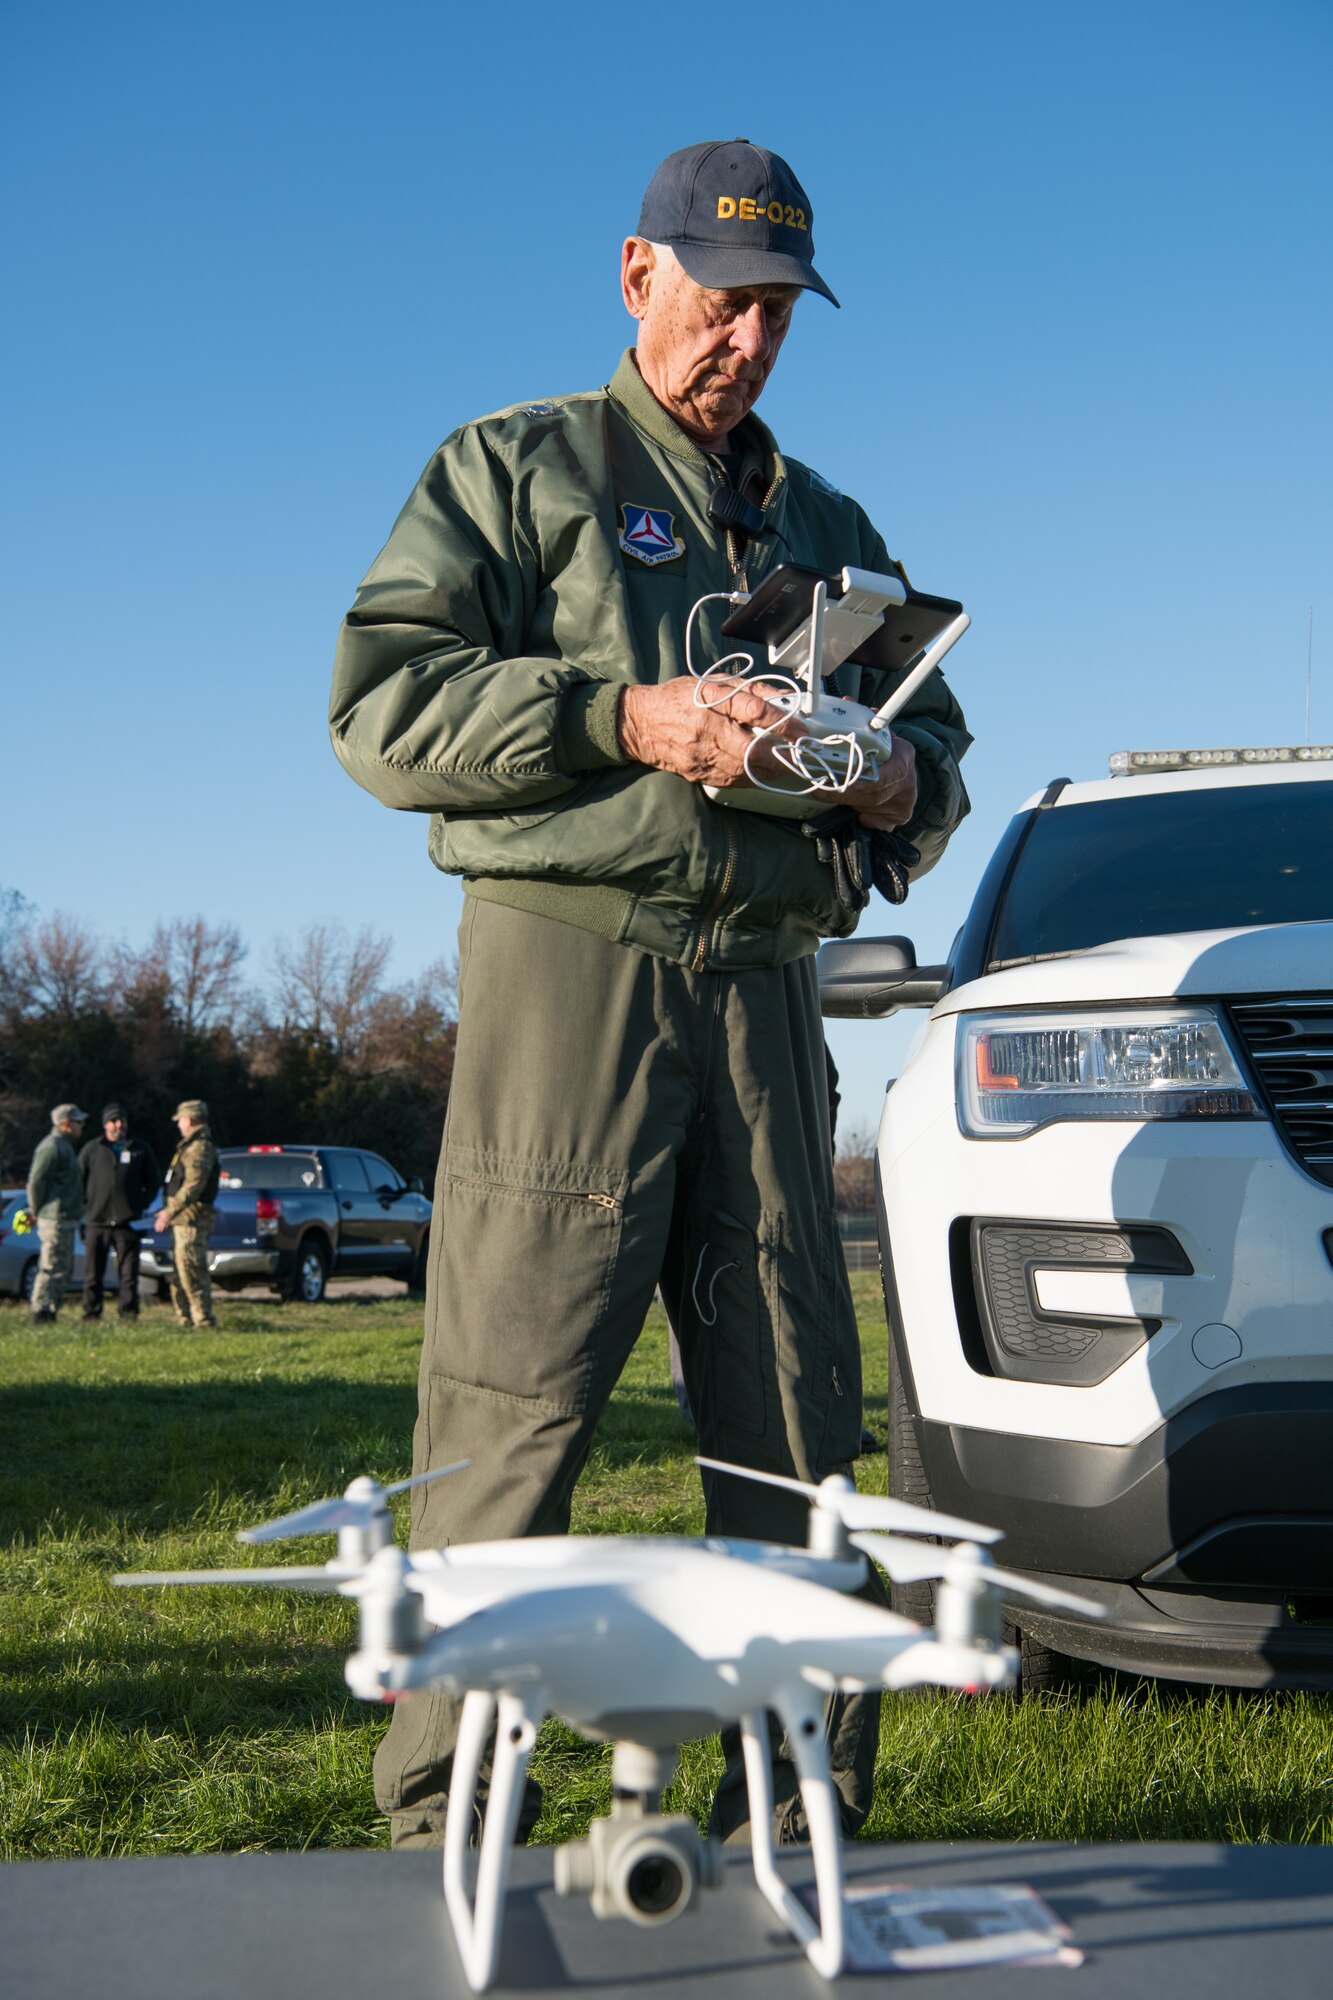 Lt. Col. Gordon Robertson, Delaware Civil Air Patrol director of operations for unmanned aircraft, prepares a commercial unmanned aerial system for flight during the Dover Operational Readiness for a Multi-domain Agile Response Exercise Nov. 13, 2019, at Dover Air Force Base, Del. The Delaware CAP provided pilots and commercial UASs to test the base’s counter UAS capabilities. (U.S. Air Force photo by Mauricio Campino)